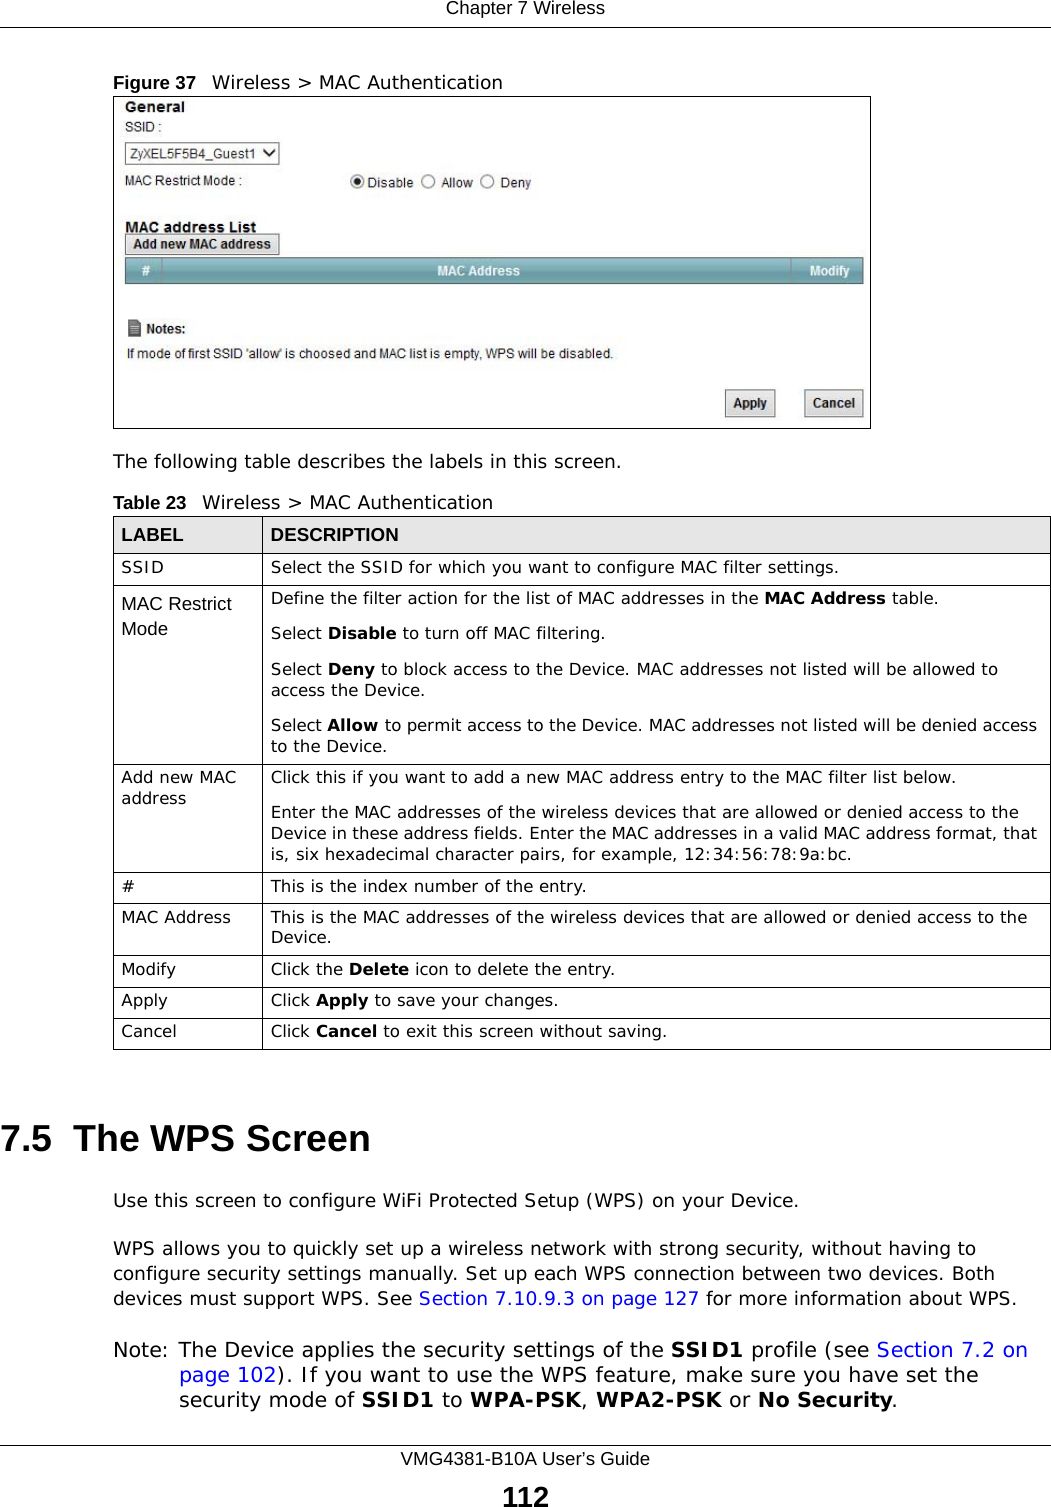 Chapter 7 WirelessVMG4381-B10A User’s Guide112Figure 37   Wireless &gt; MAC AuthenticationThe following table describes the labels in this screen.7.5  The WPS ScreenUse this screen to configure WiFi Protected Setup (WPS) on your Device.WPS allows you to quickly set up a wireless network with strong security, without having to configure security settings manually. Set up each WPS connection between two devices. Both devices must support WPS. See Section 7.10.9.3 on page 127 for more information about WPS.Note: The Device applies the security settings of the SSID1 profile (see Section 7.2 on page 102). If you want to use the WPS feature, make sure you have set the security mode of SSID1 to WPA-PSK, WPA2-PSK or No Security.Table 23   Wireless &gt; MAC AuthenticationLABEL DESCRIPTIONSSID Select the SSID for which you want to configure MAC filter settings.MAC Restrict Mode Define the filter action for the list of MAC addresses in the MAC Address table. Select Disable to turn off MAC filtering.Select Deny to block access to the Device. MAC addresses not listed will be allowed to access the Device. Select Allow to permit access to the Device. MAC addresses not listed will be denied access to the Device. Add new MAC address Click this if you want to add a new MAC address entry to the MAC filter list below.Enter the MAC addresses of the wireless devices that are allowed or denied access to the Device in these address fields. Enter the MAC addresses in a valid MAC address format, that is, six hexadecimal character pairs, for example, 12:34:56:78:9a:bc.#This is the index number of the entry.MAC Address This is the MAC addresses of the wireless devices that are allowed or denied access to the Device.Modify Click the Delete icon to delete the entry.Apply Click Apply to save your changes.Cancel Click Cancel to exit this screen without saving.